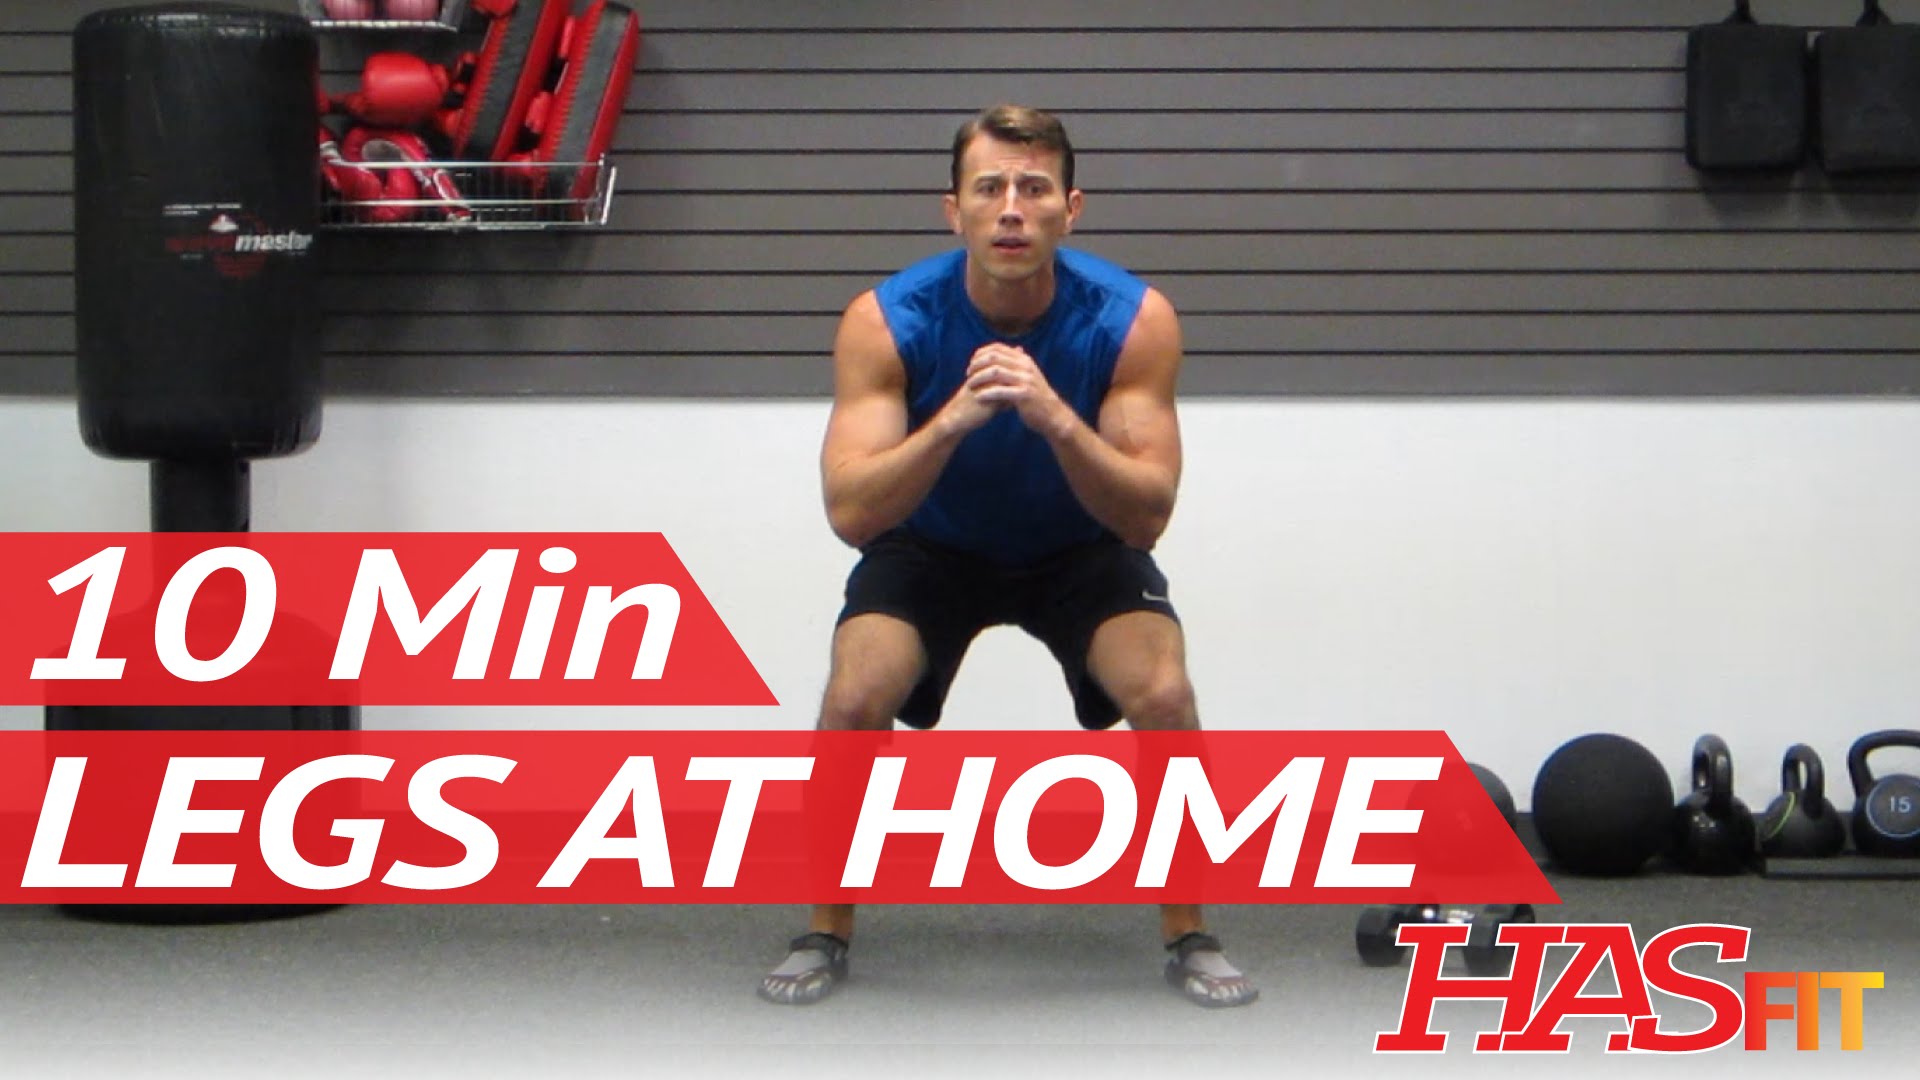 Leg & Thigh Workout - 10 Minute At Home Leg Workout - with the top